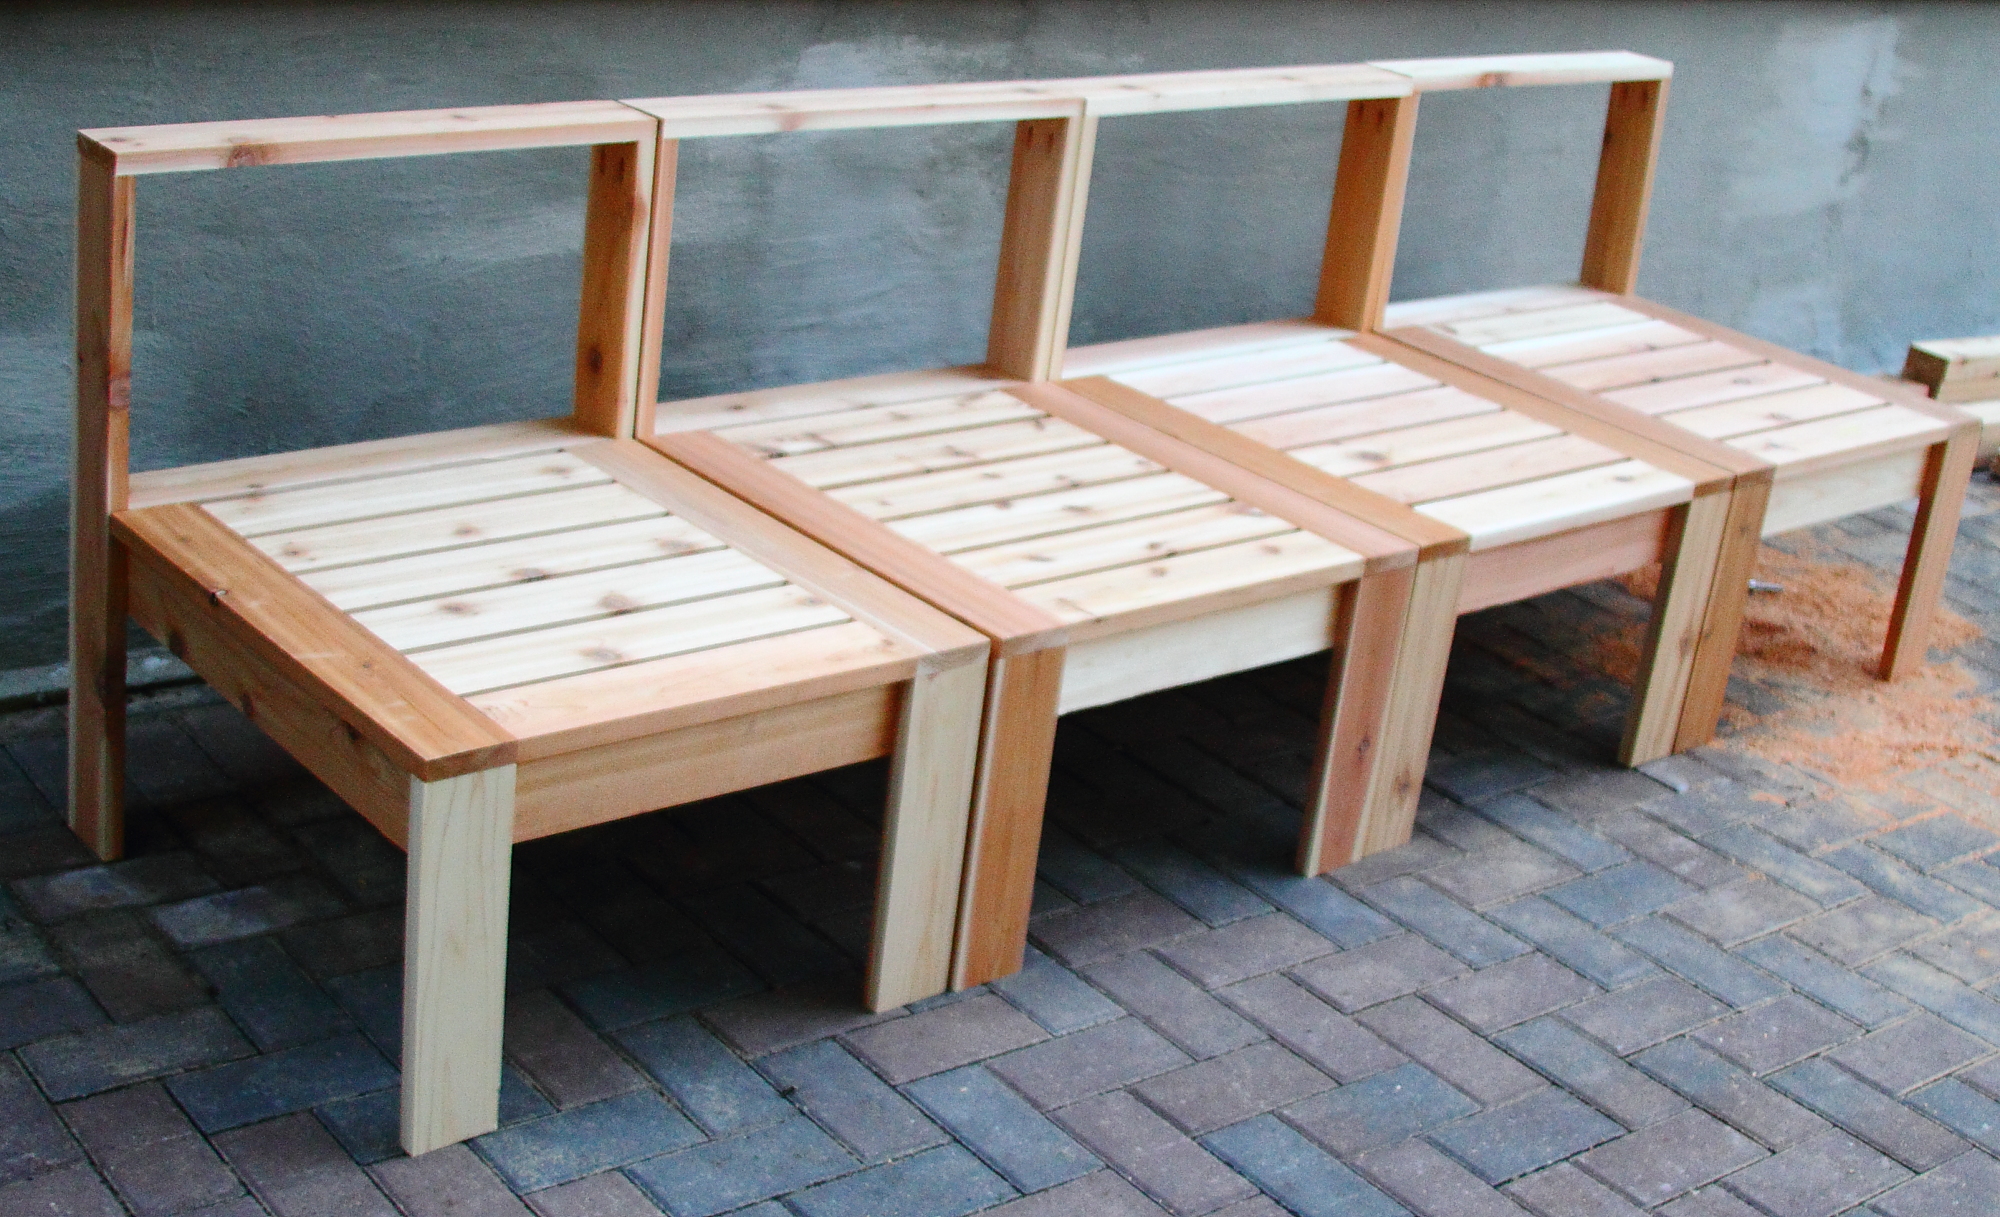  Plans likewise 2X4 Garden Bench also 2X4 Outdoor Bench Plans. on